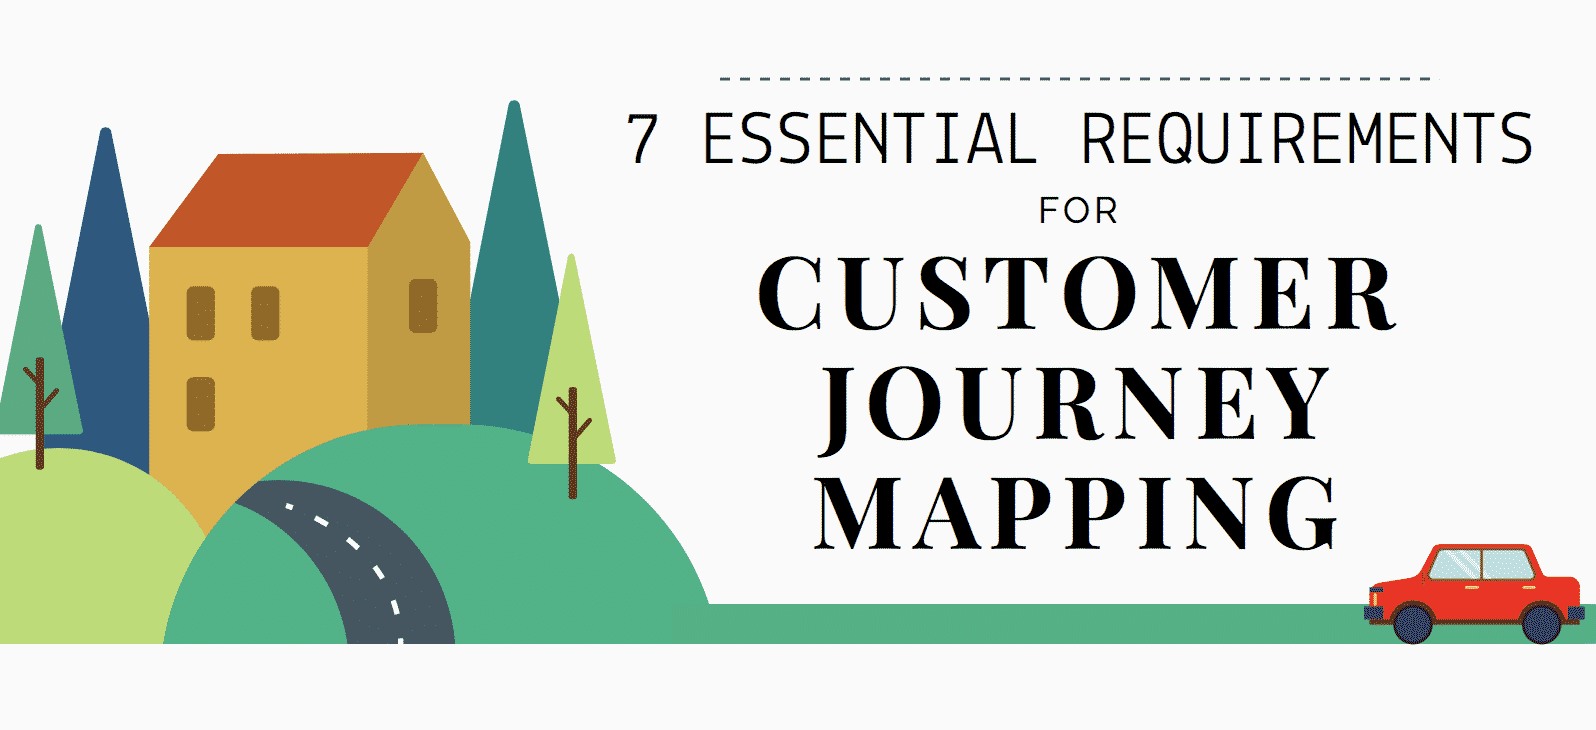 7 essential requirements cjm infographic preview b - Customer Journey Mapping